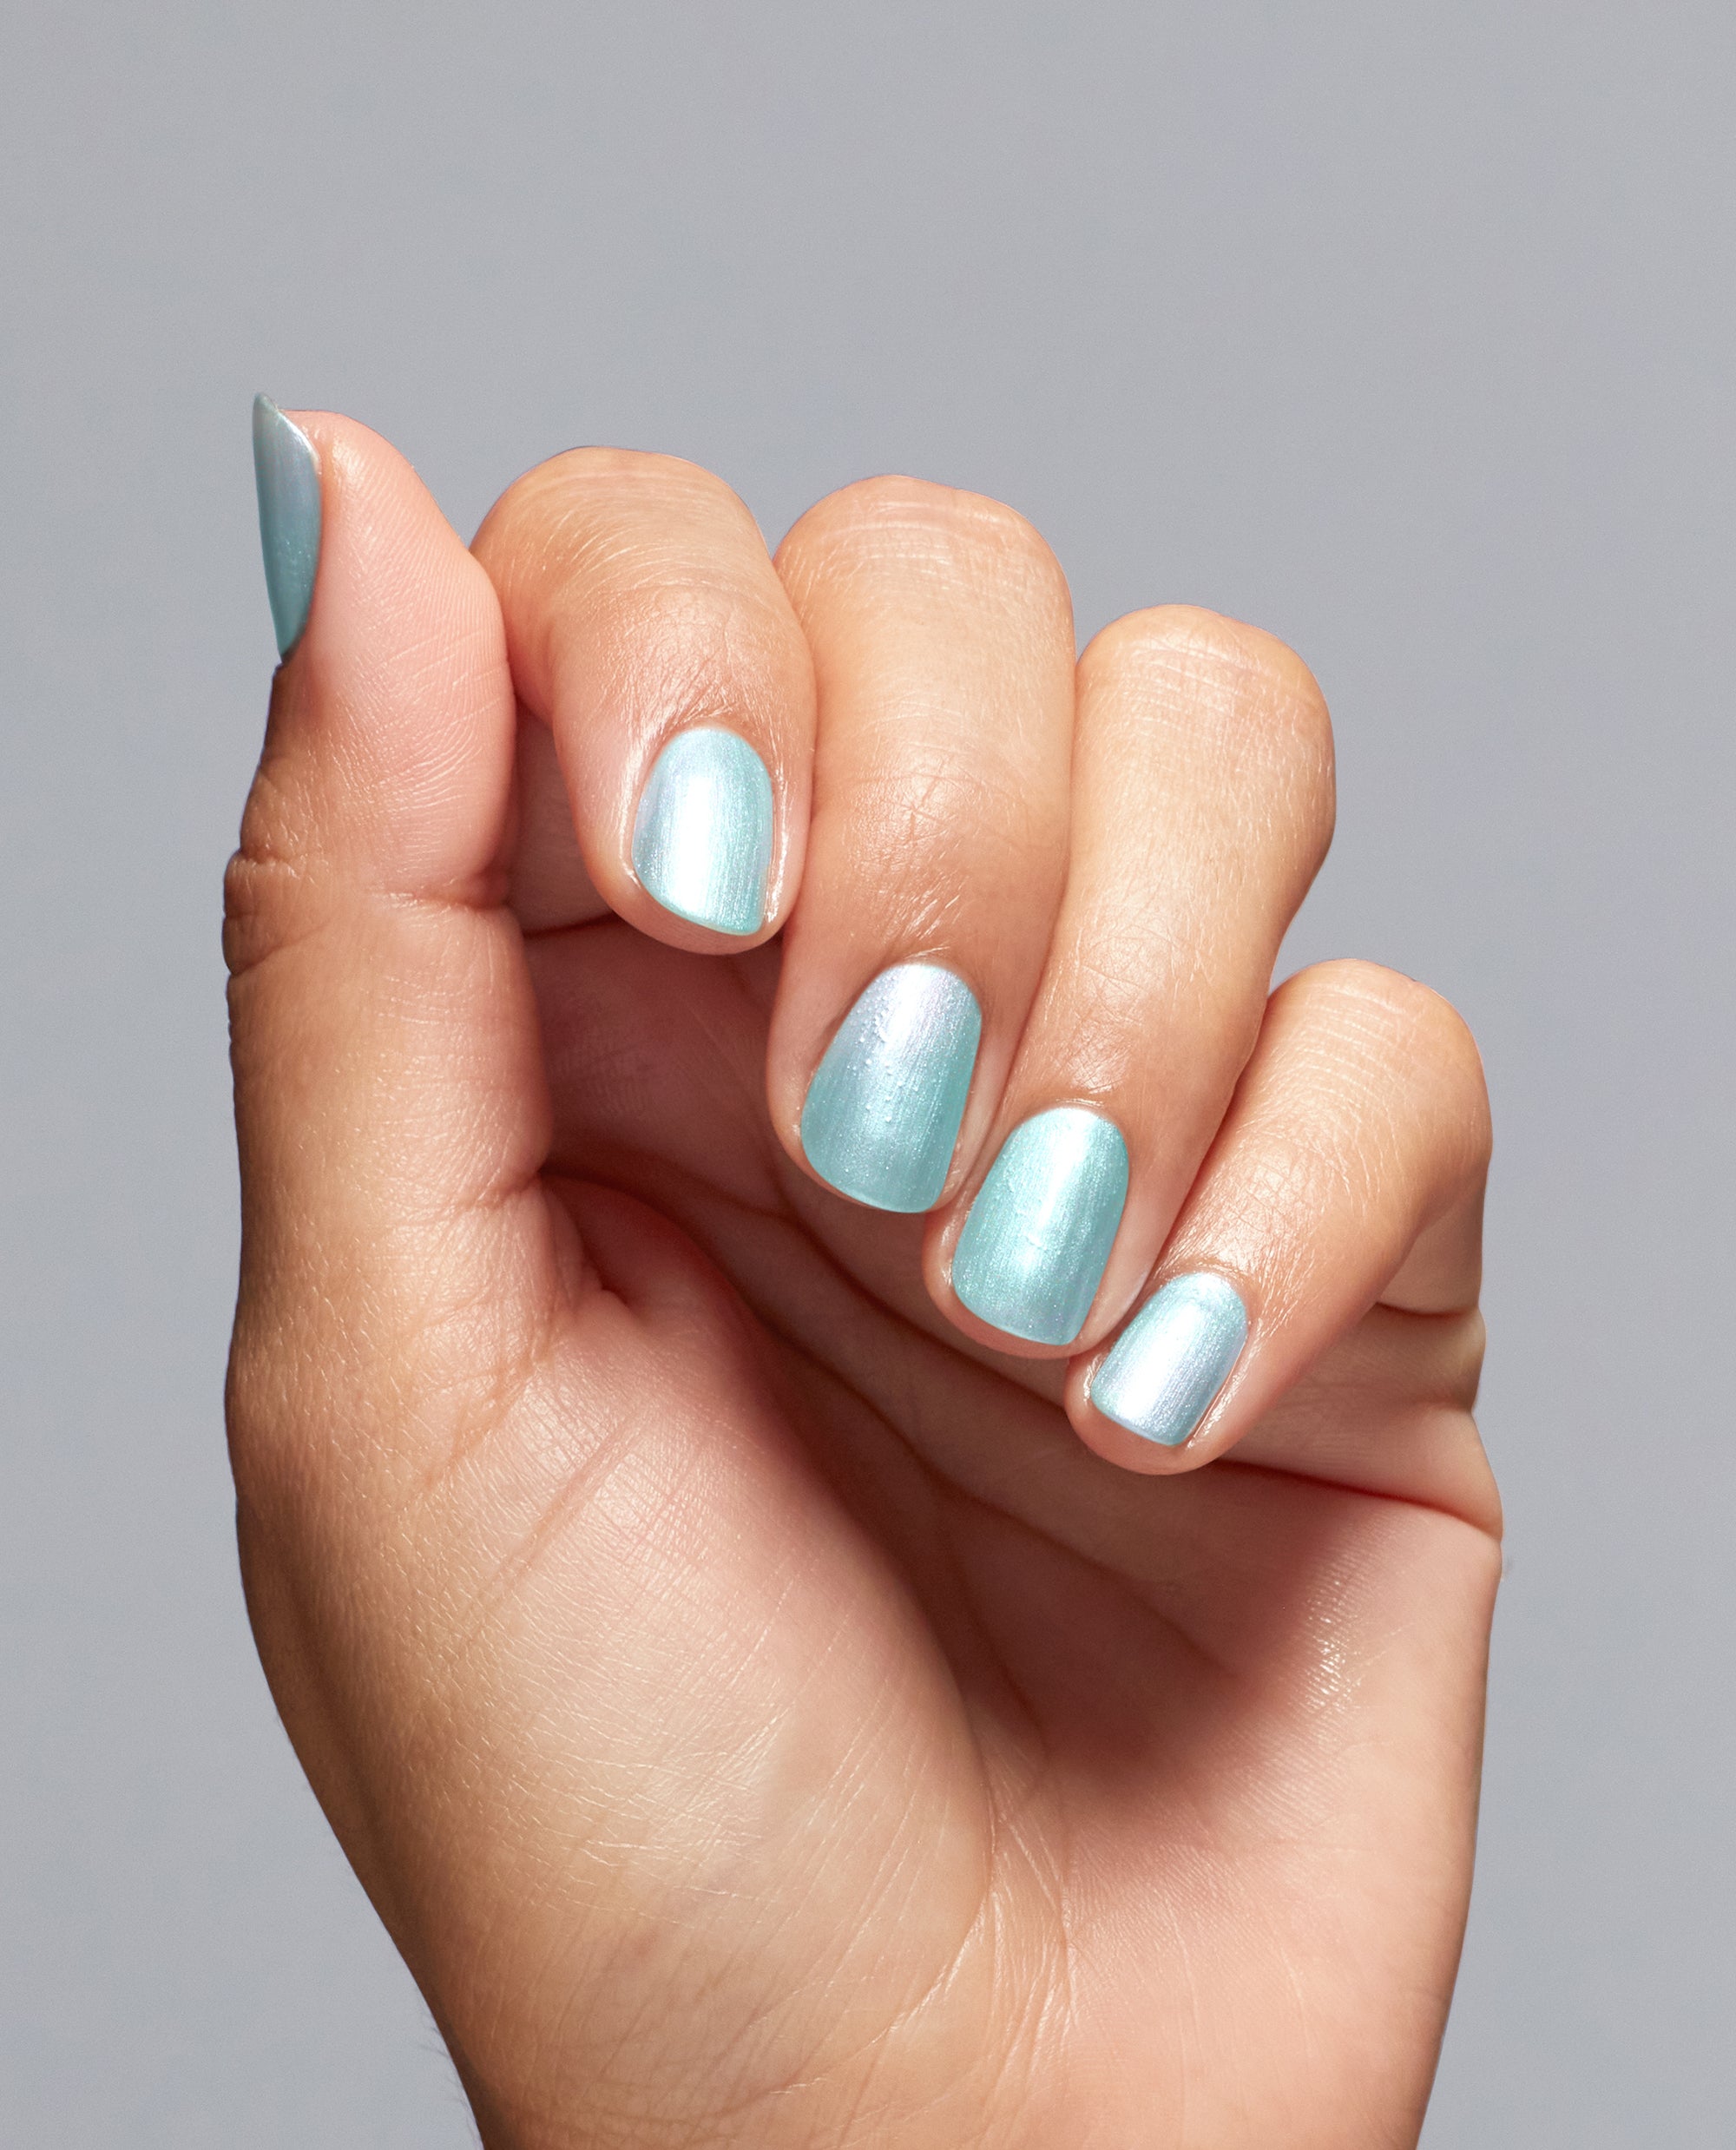 Buy Bluesky Gel Nail Polish Set, Top Coat and Base Coat with Cuticle Oil. 3  x 5ml. Top and Base (Requires curing under UV/LED Lamp) Online at Low  Prices in India -